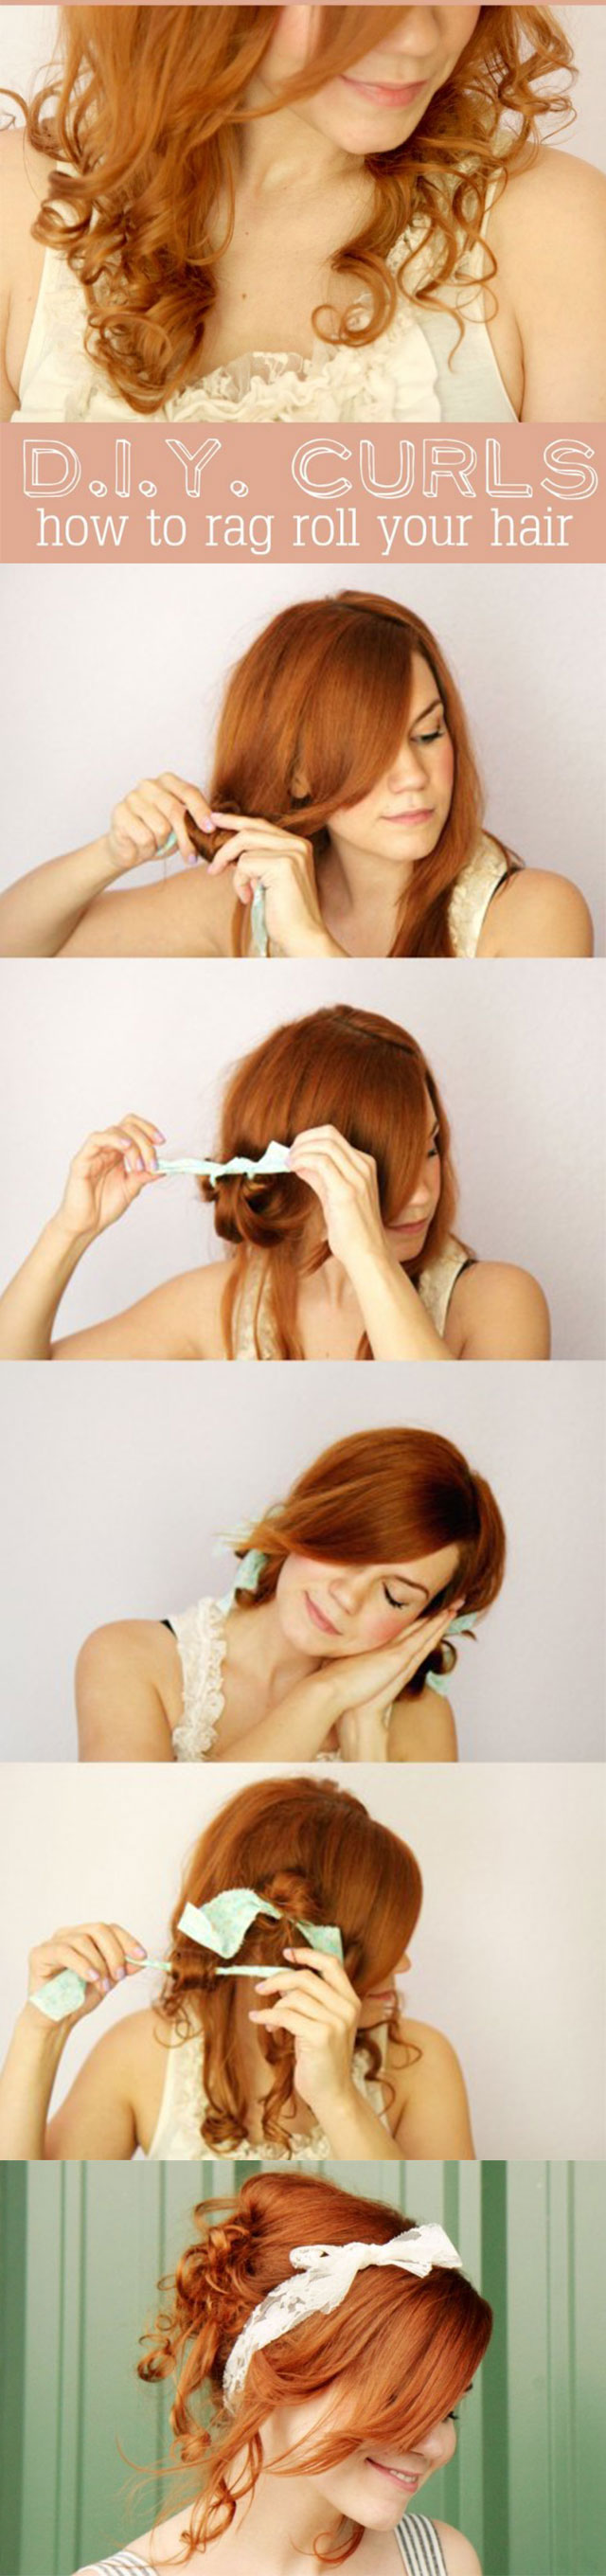 DIY-CURLS-HOW-TO-RAG-ROLL-YOUR-HAIR